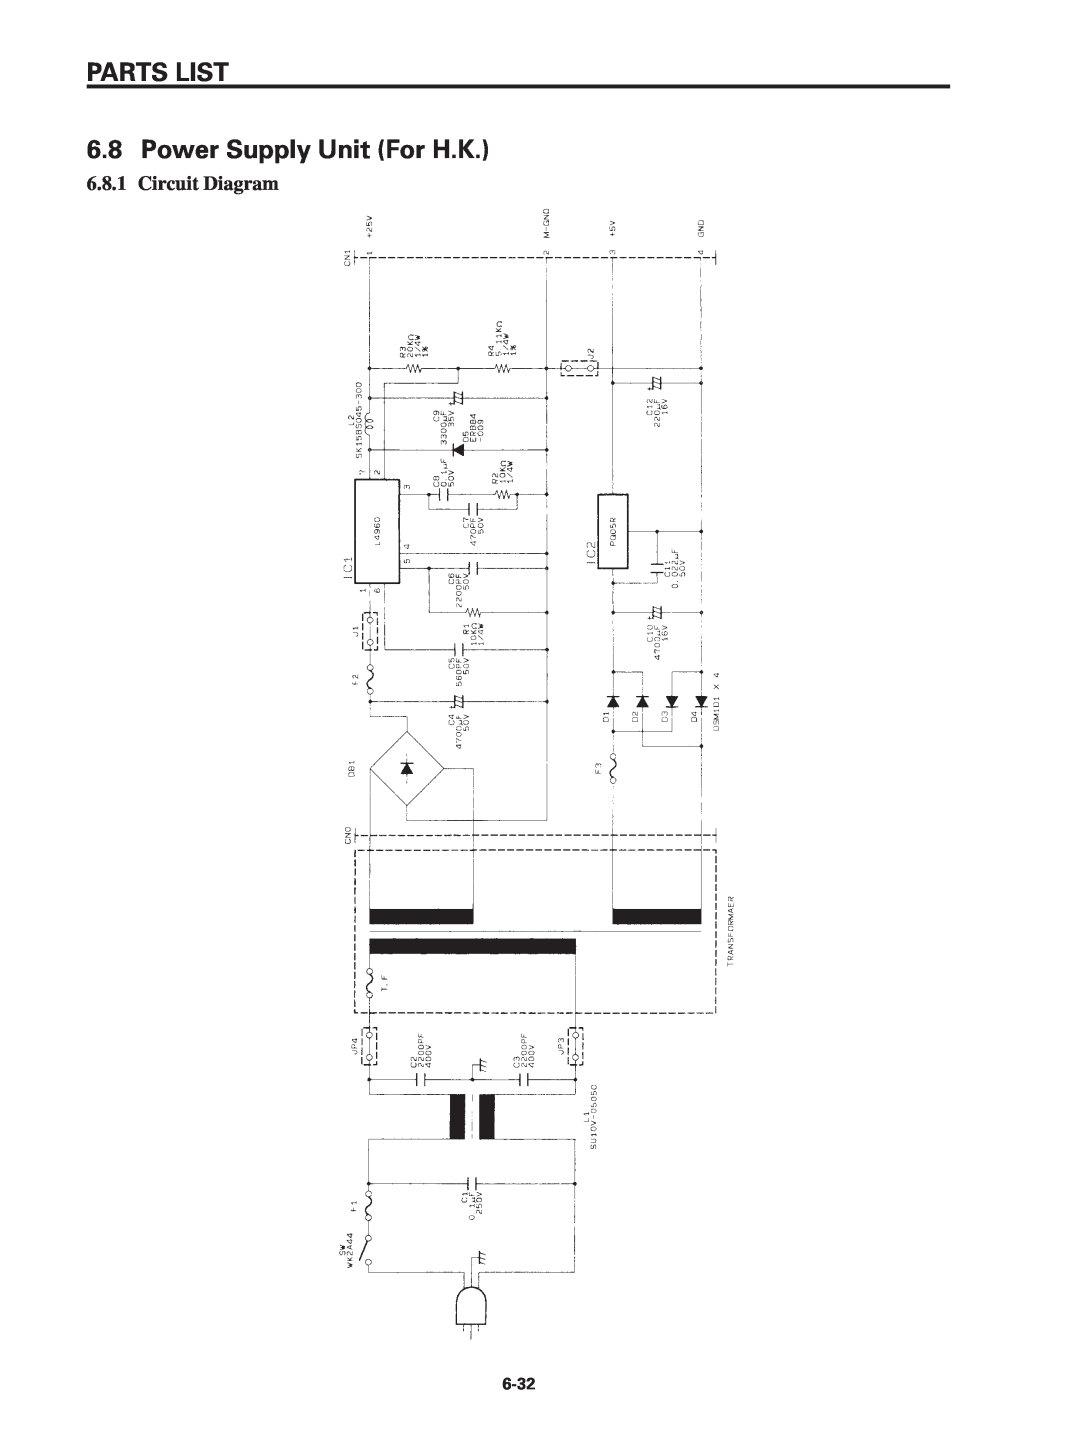 Star Micronics SP320S technical manual PARTS LIST 6.8 Power Supply Unit For H.K, Circuit Diagram 